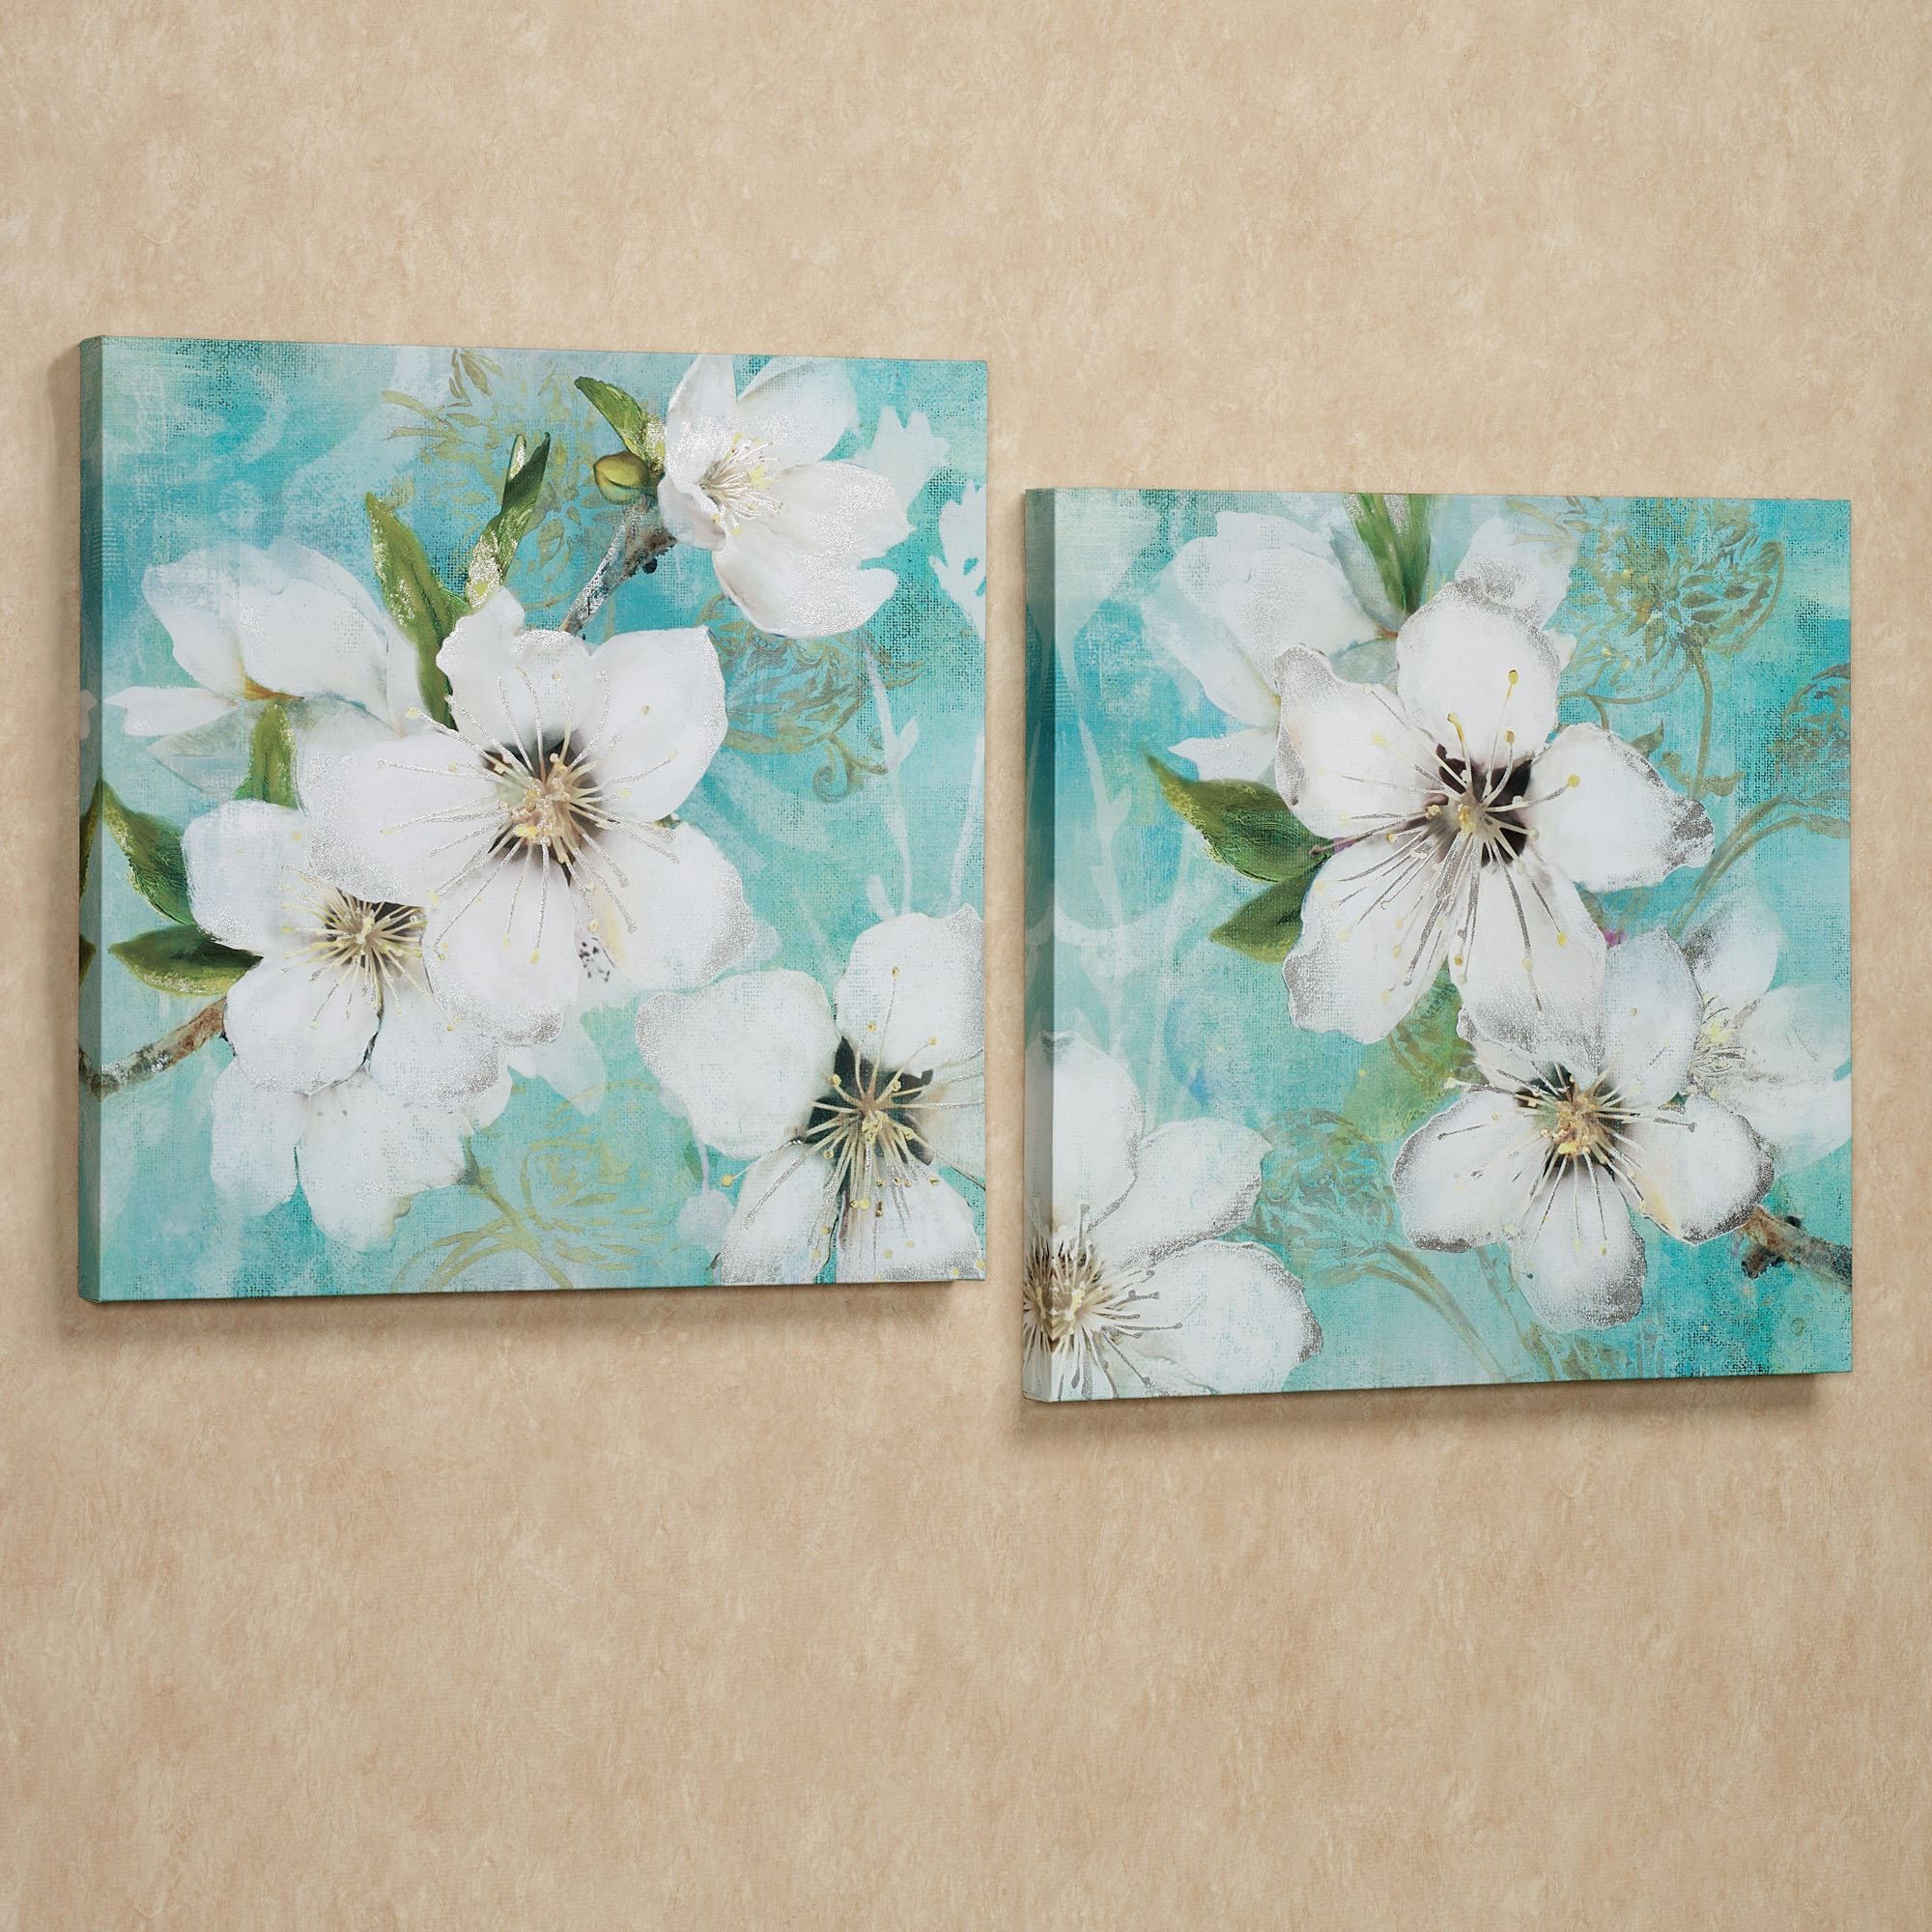 Flowers In Bloom Giclee Canvas Wall Art Set Within Crestview Bloom Wall Art (View 15 of 15)